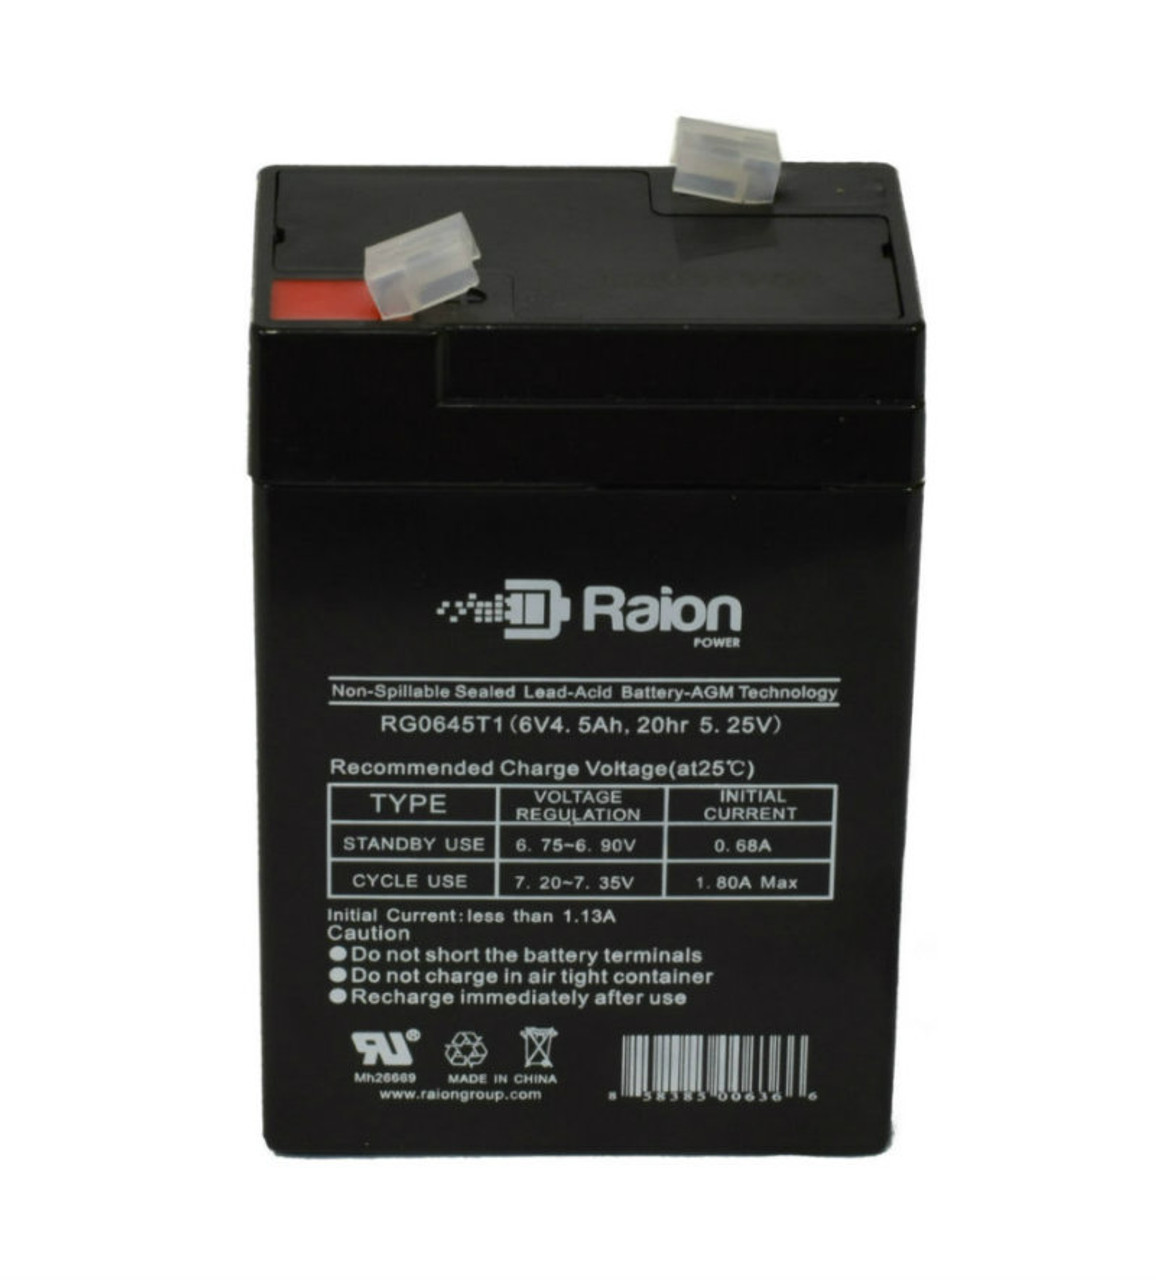 Raion Power RG0645T1 Replacement Battery Cartridge for FengSheng FS6-4.5